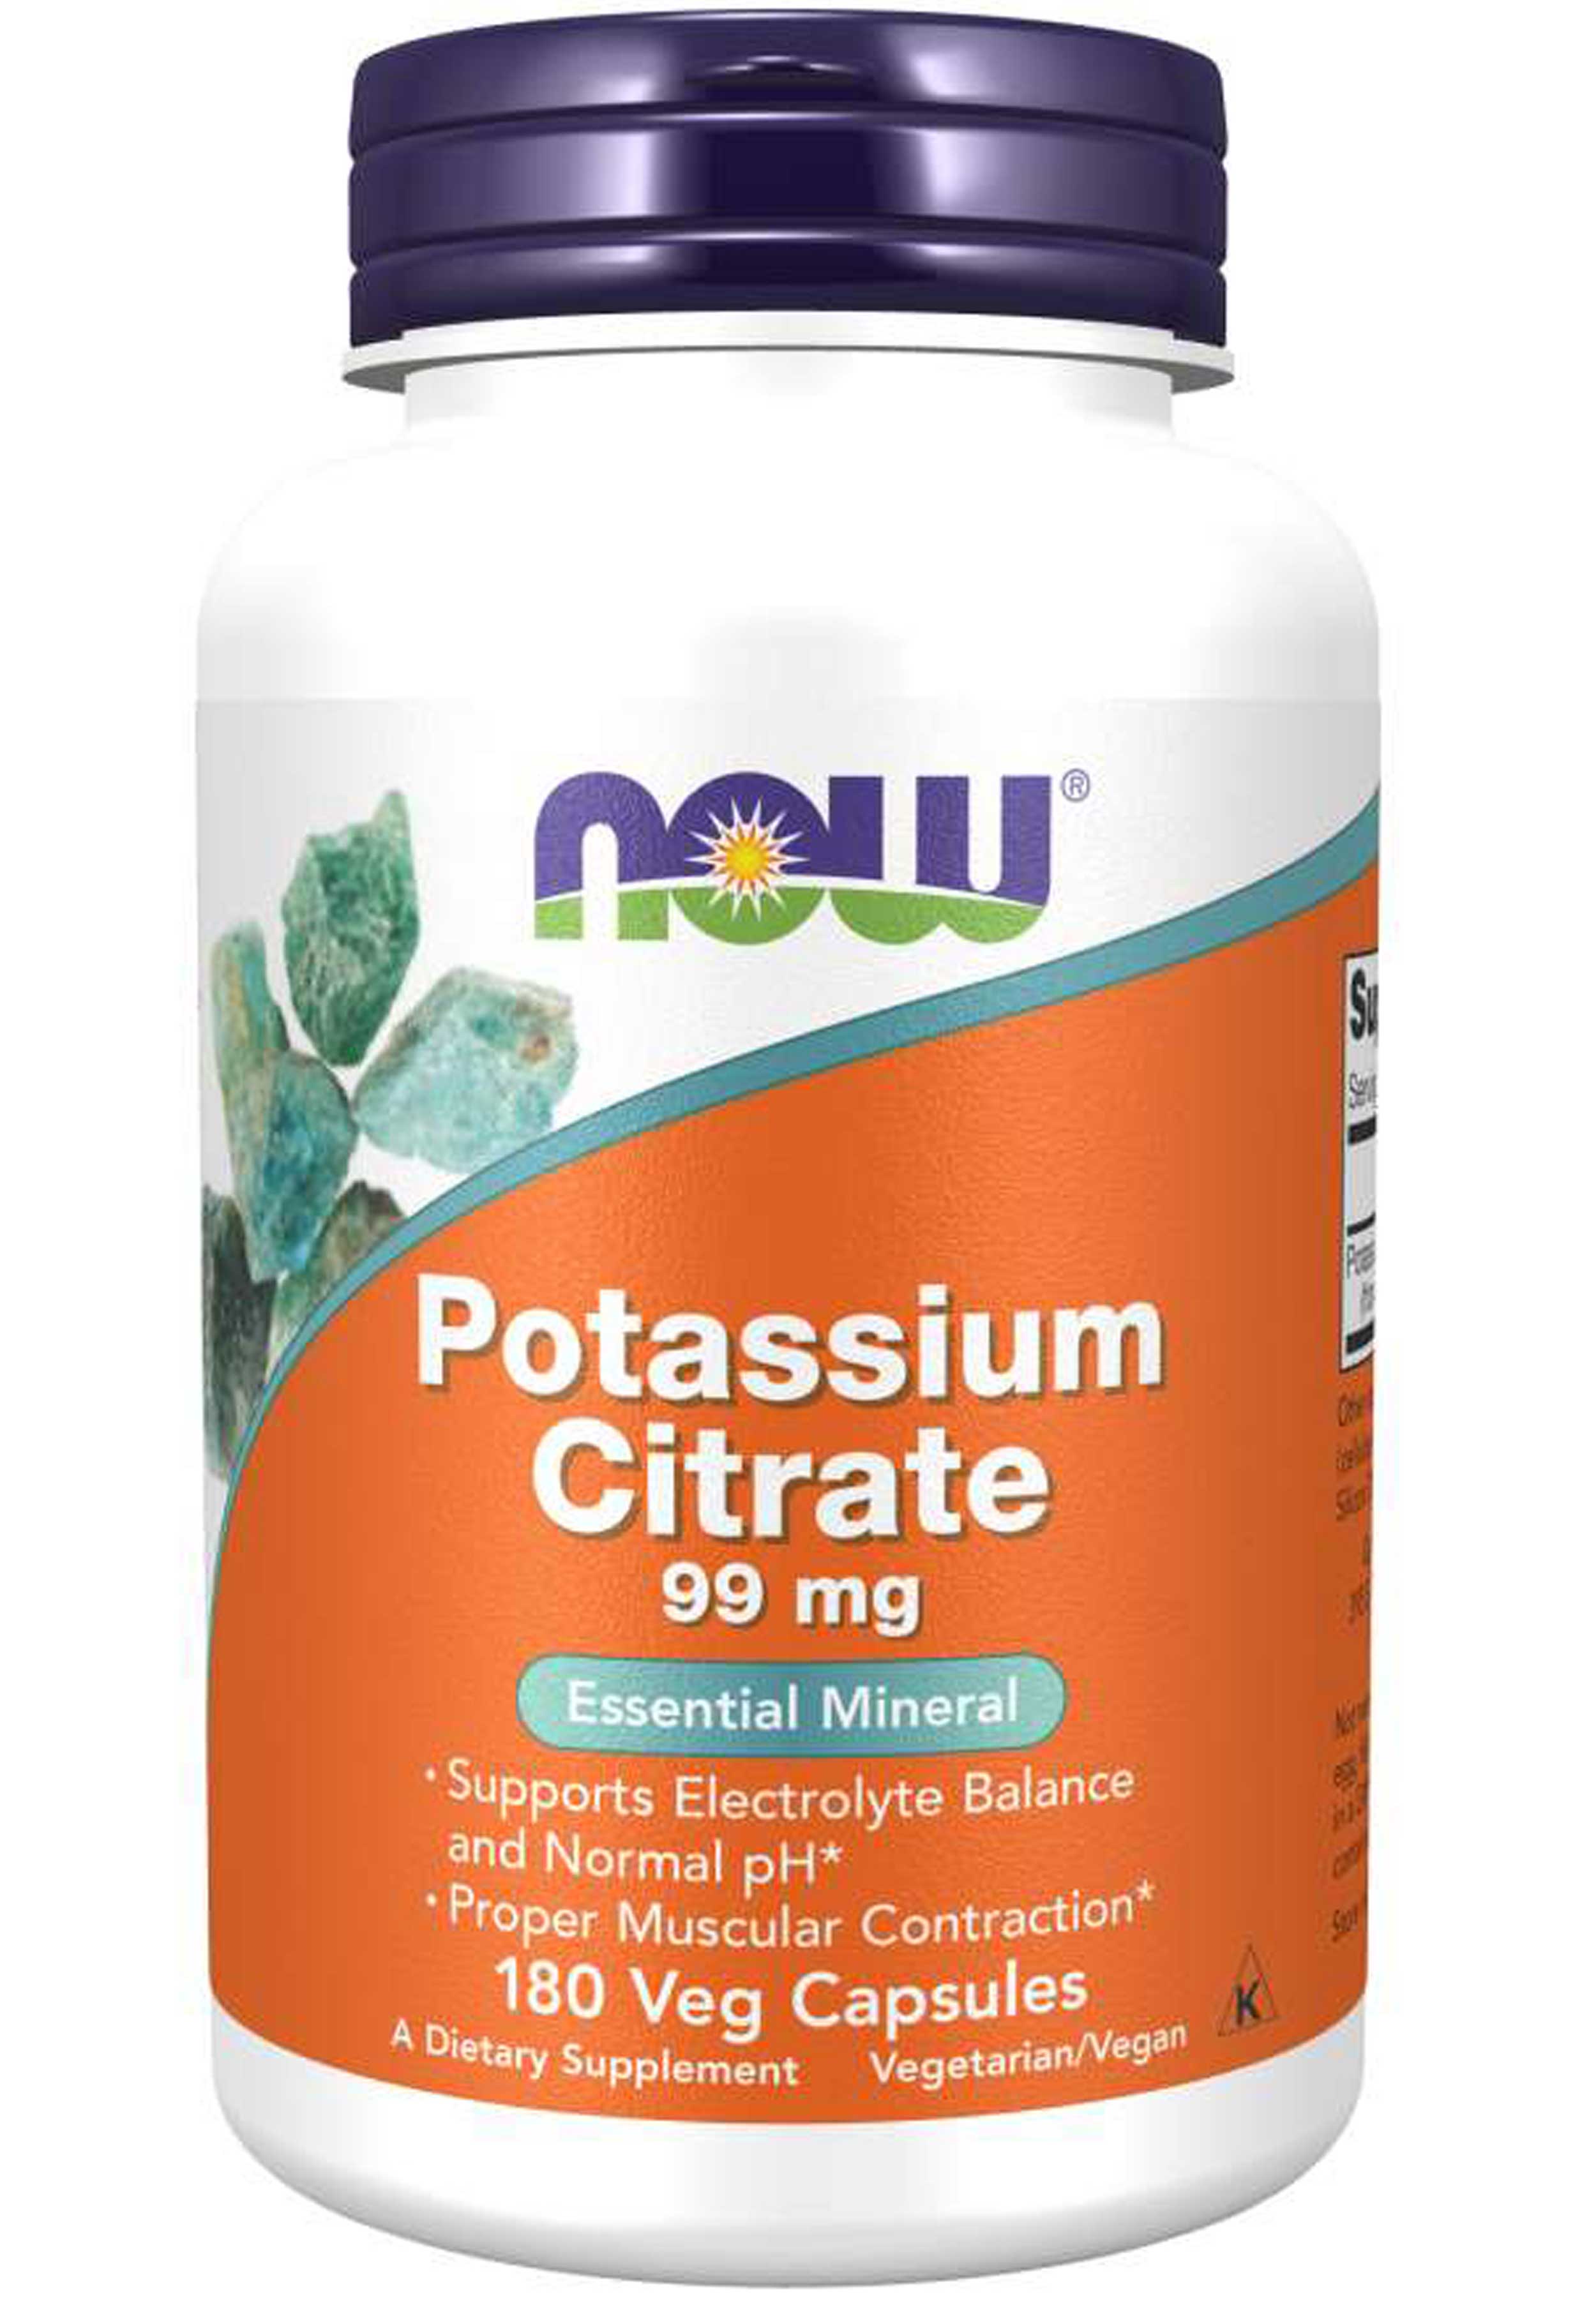 NOW Potassium Citrate 99 mg